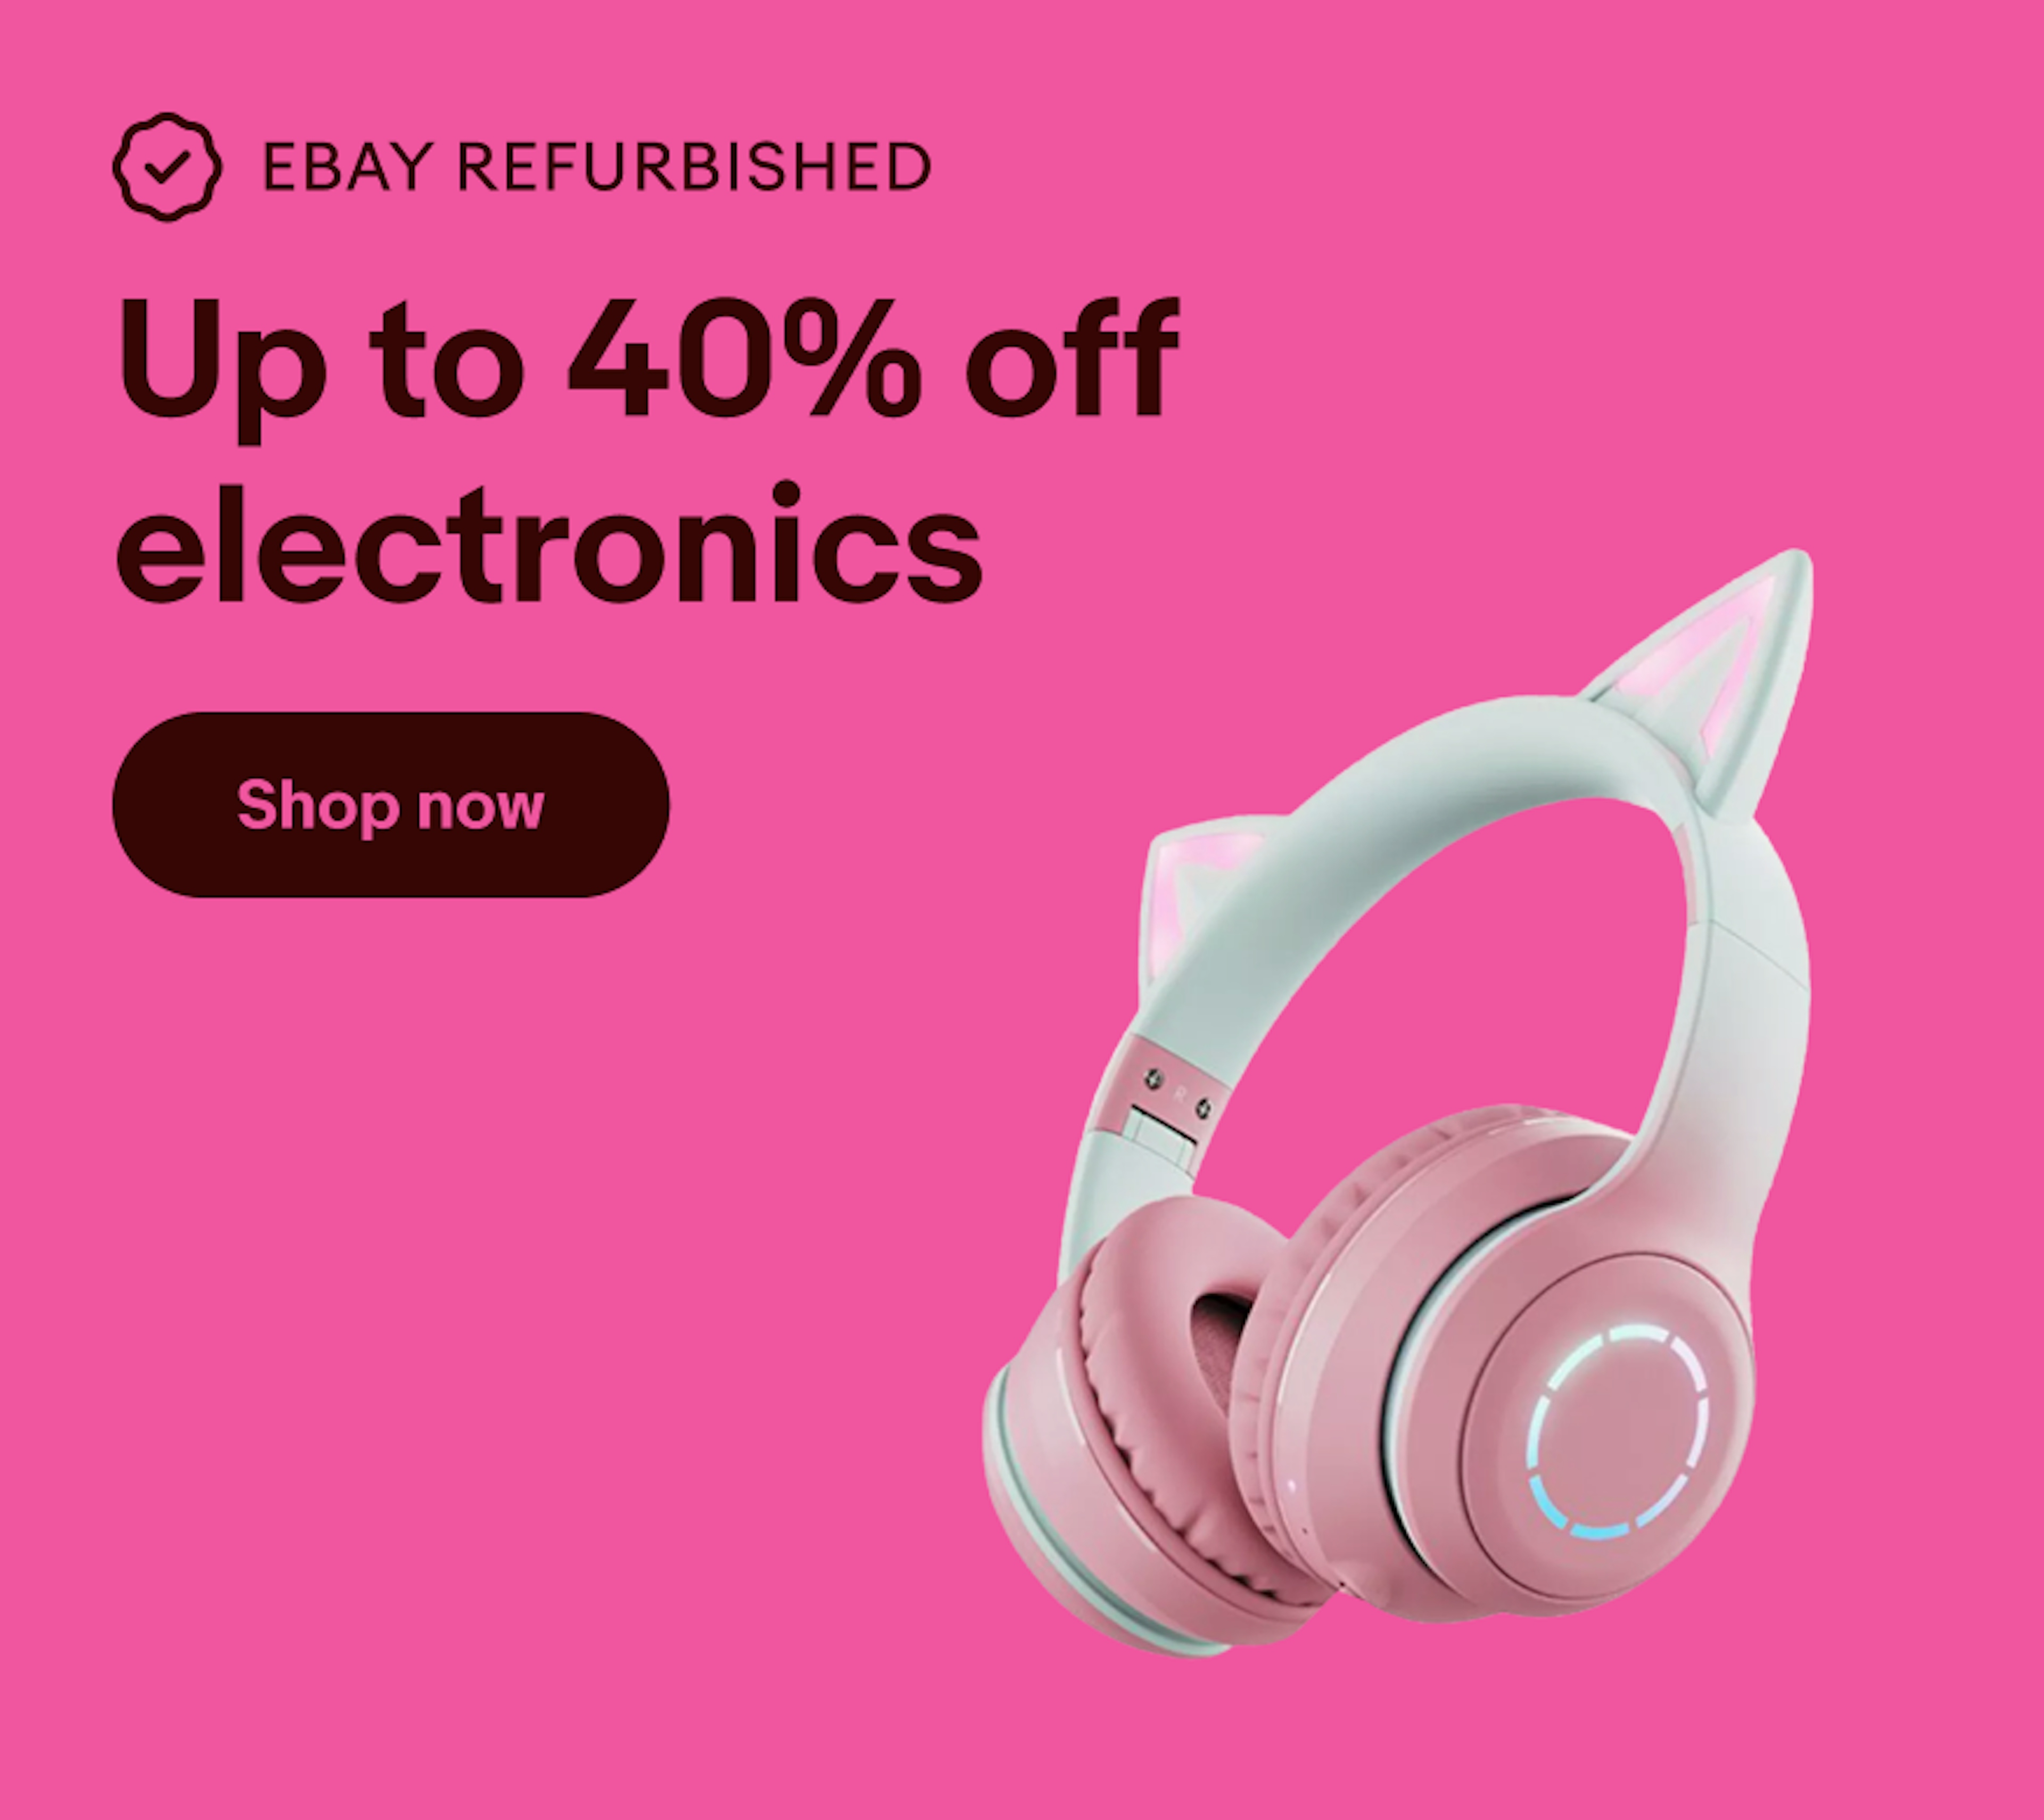 An ad for eBay Refurbished electronics with a deal for 40% off. A checkmark rosette icon is used in the top overline, and the color scheme is a vibrant pink.